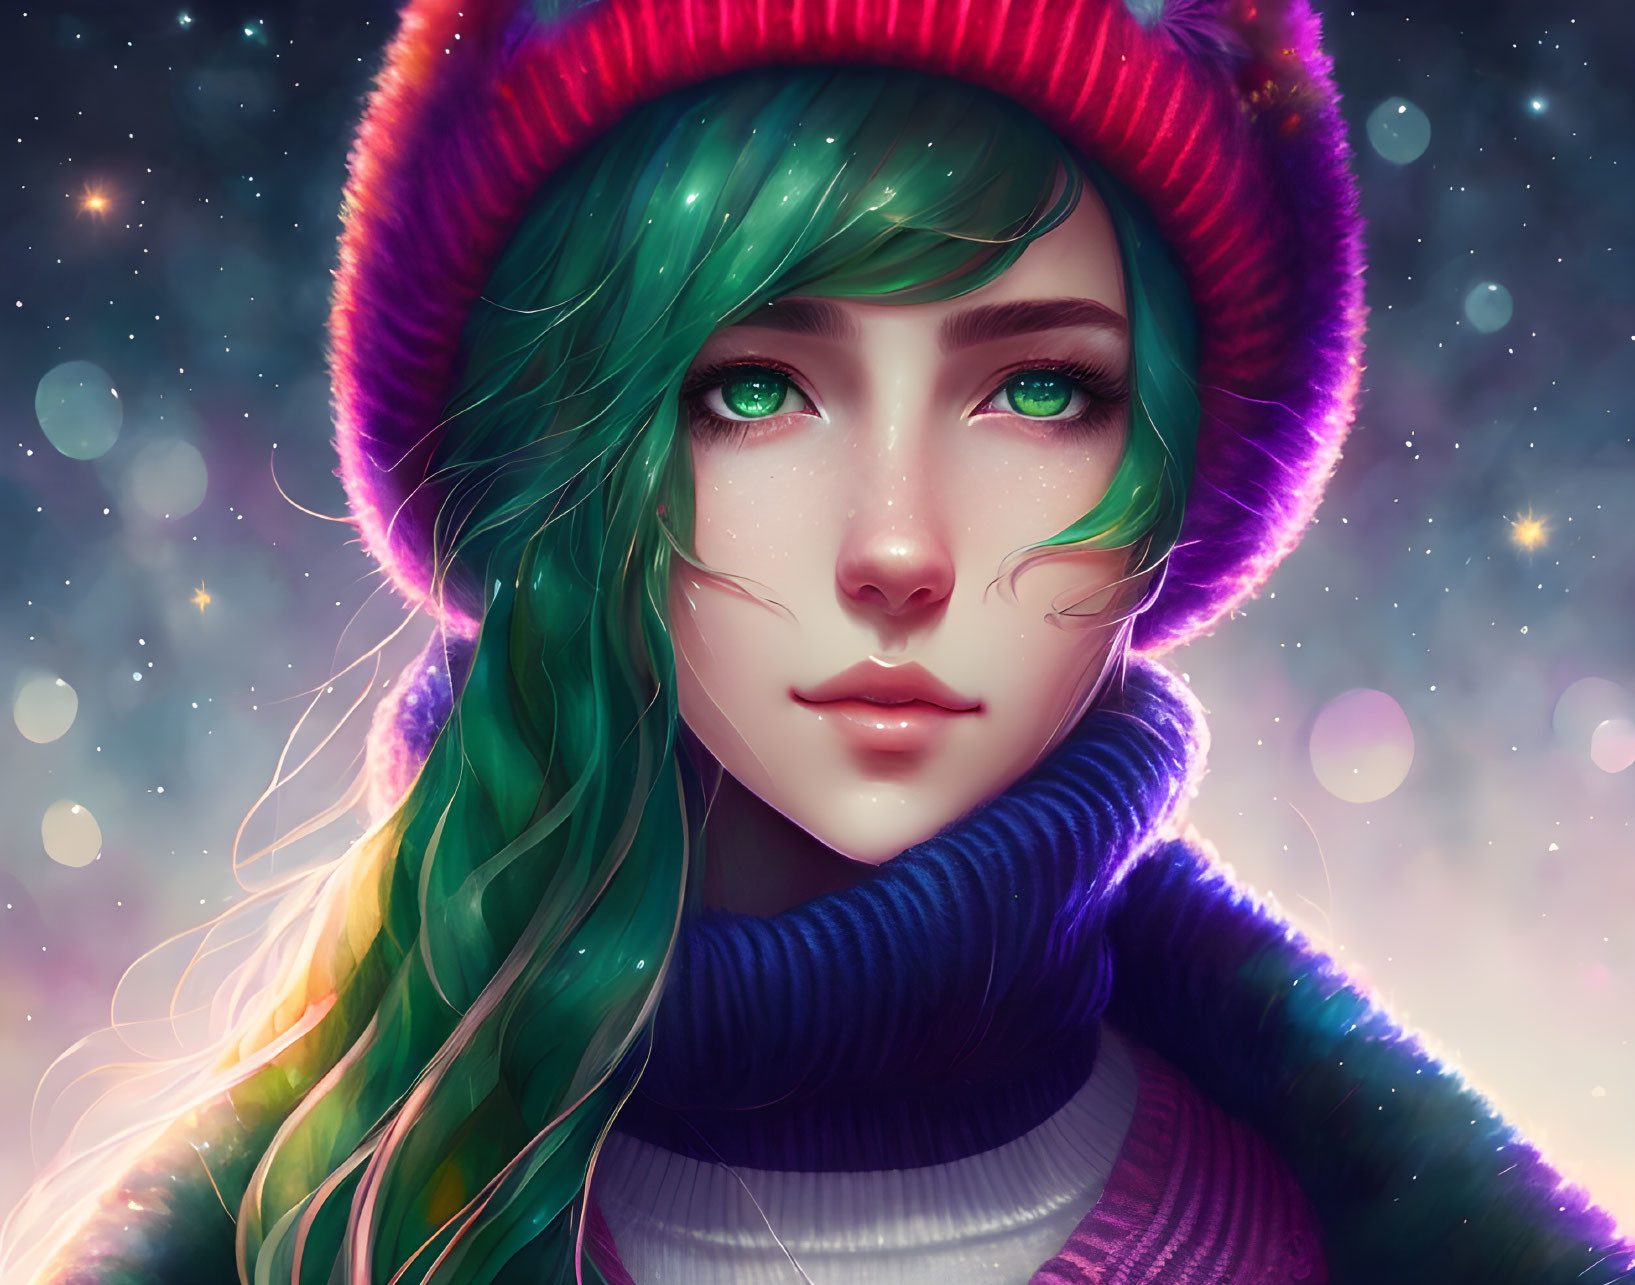 Digital artwork of girl with green hair in colorful hat & turtleneck, surrounded by sparkling stars.